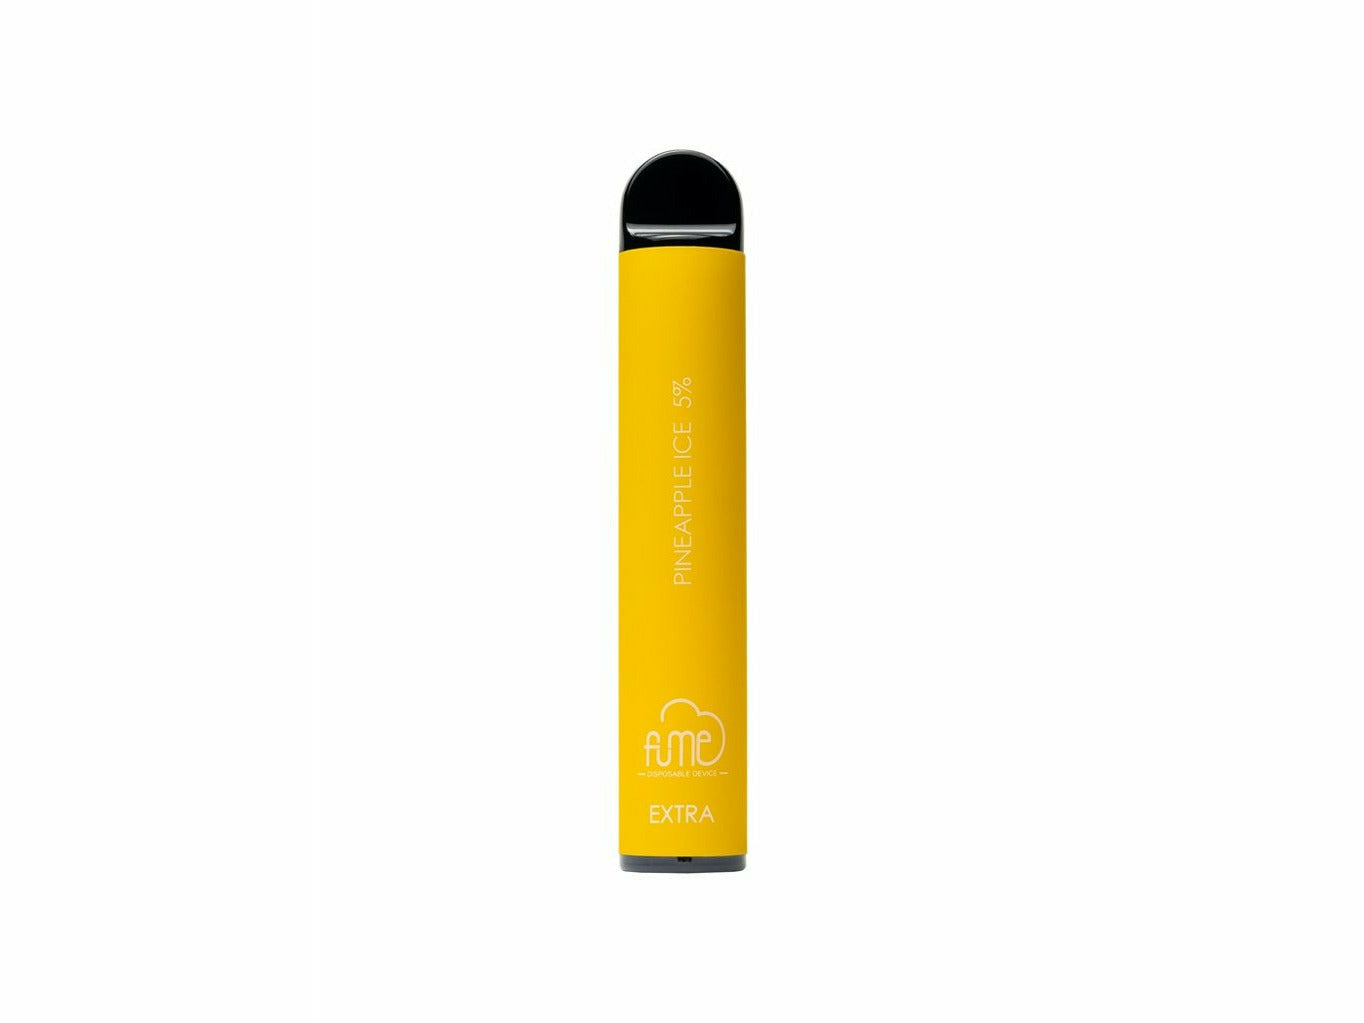 Fume Pineapple ICE size Extra disposable vape device